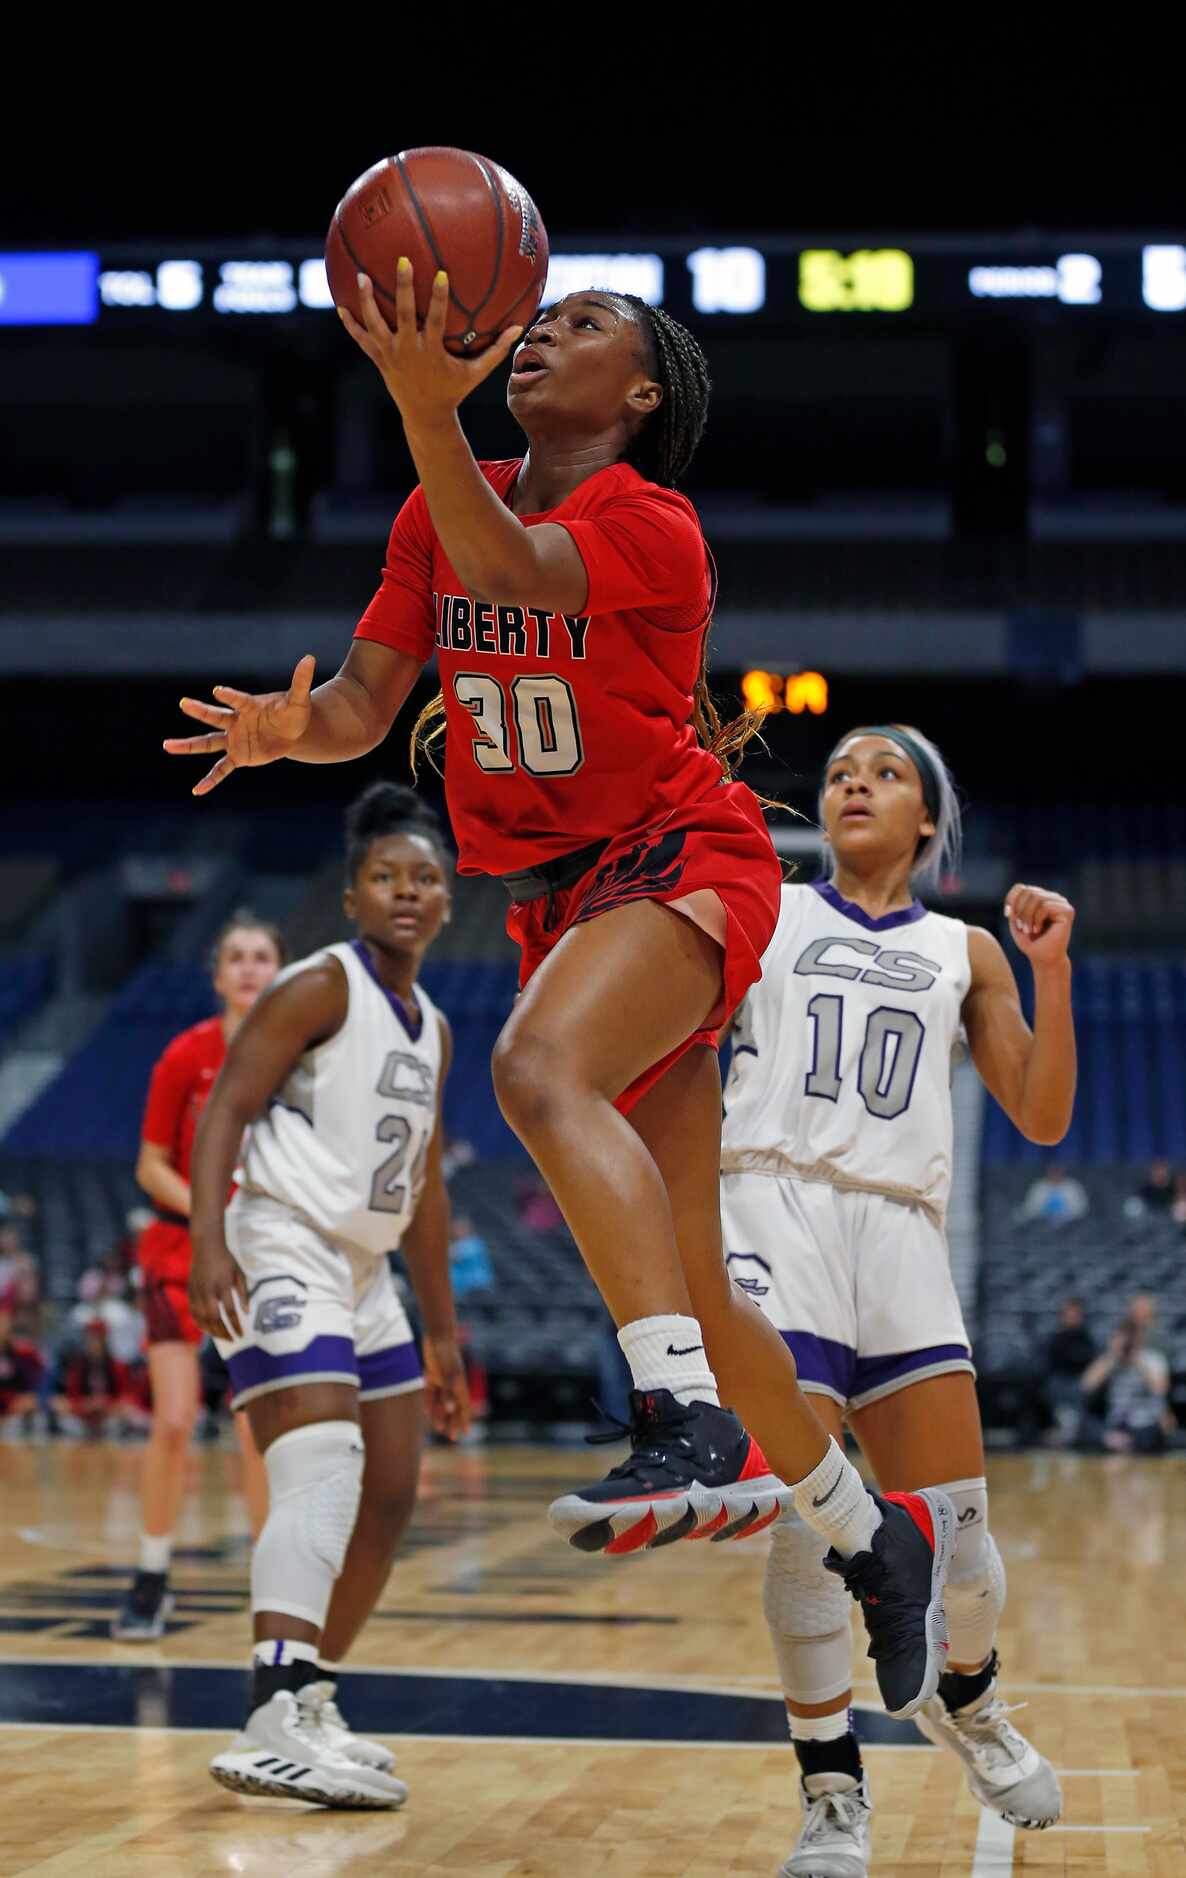 Frisco Liberty sophomore guard Jazzy Owens-Barnett scores against College Station in a 5A...